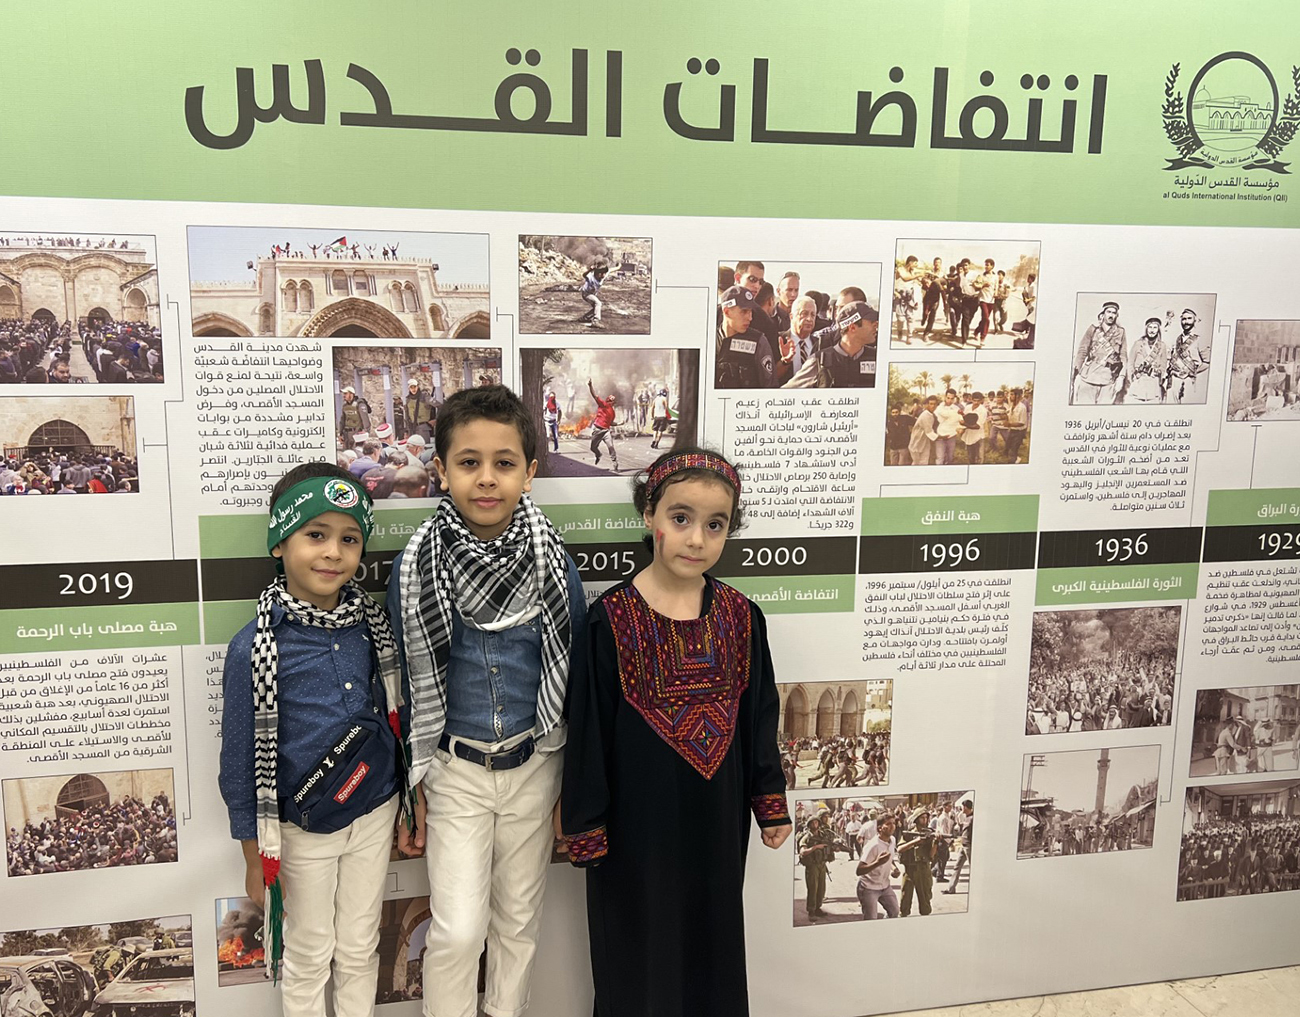 Al-Quds expo in Beirut, an interactive step to introduce Palestinian issue